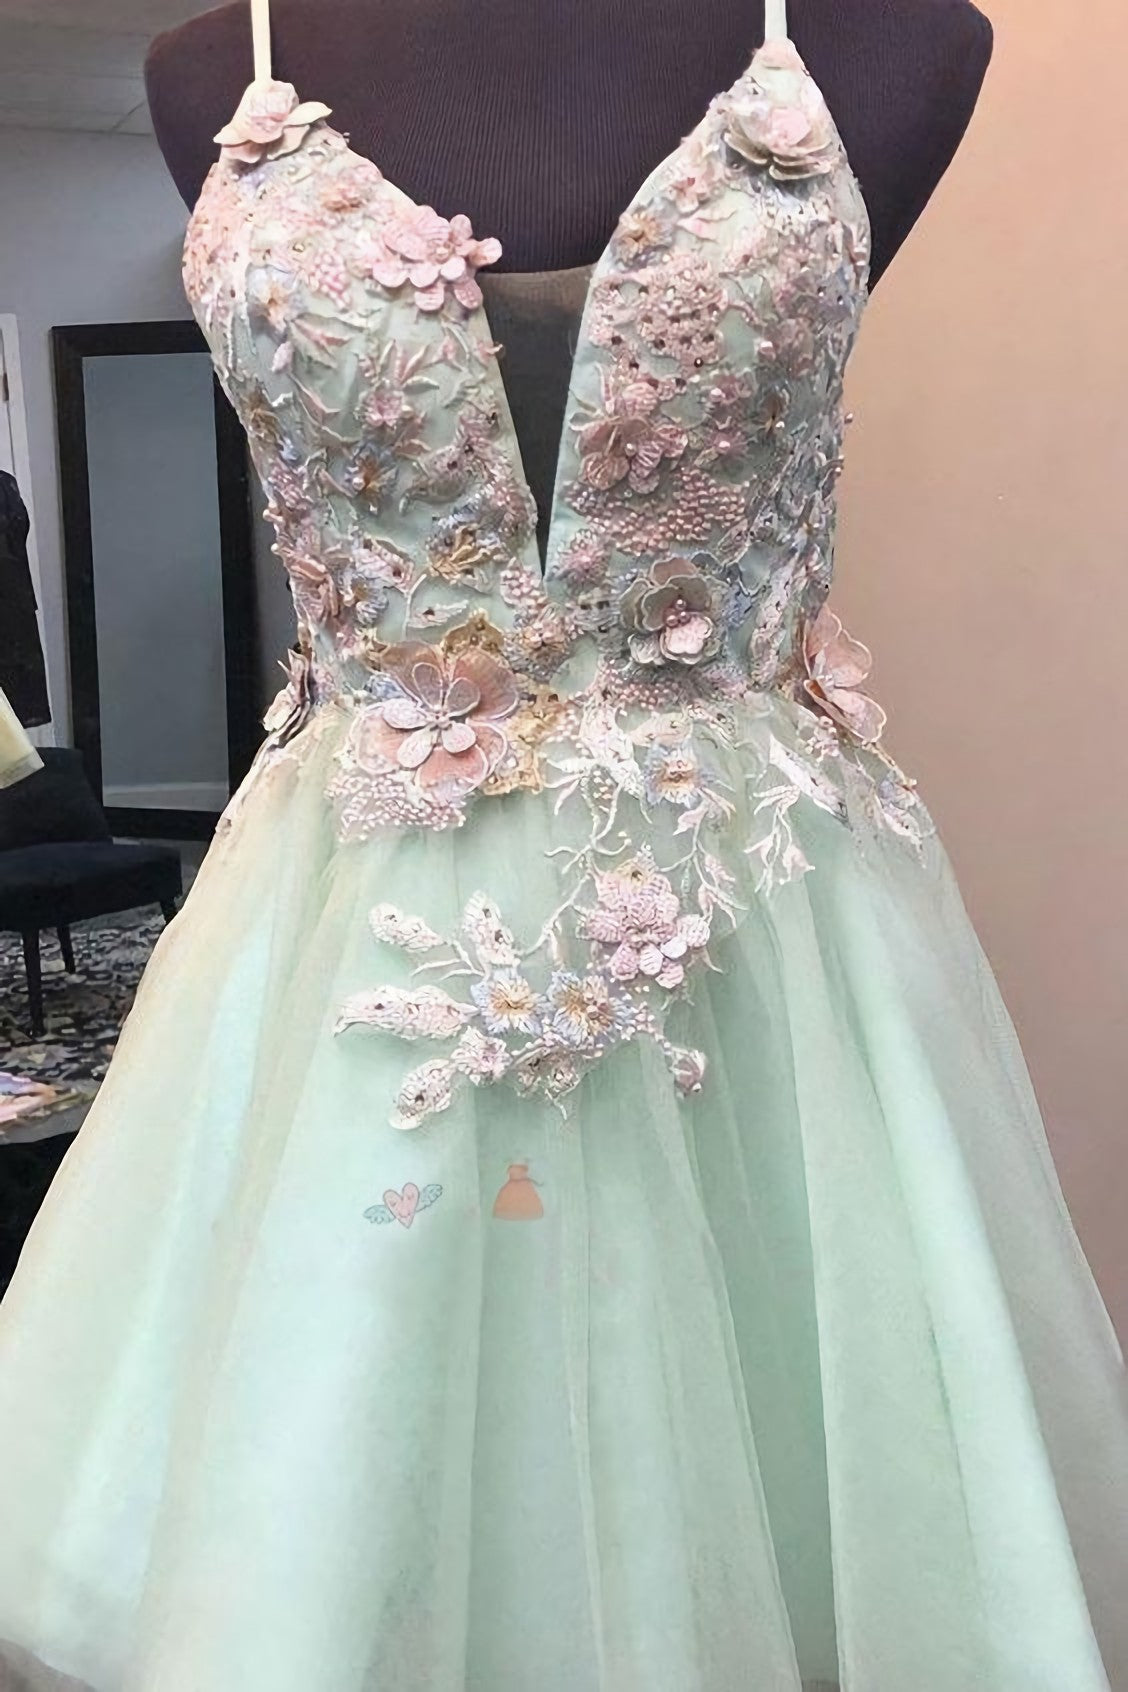 Homecoming Dresses Chiffon, Mint Green Short Homecoming Dress, With Flowers Mini Tulle Graduation Dress, With Pearls